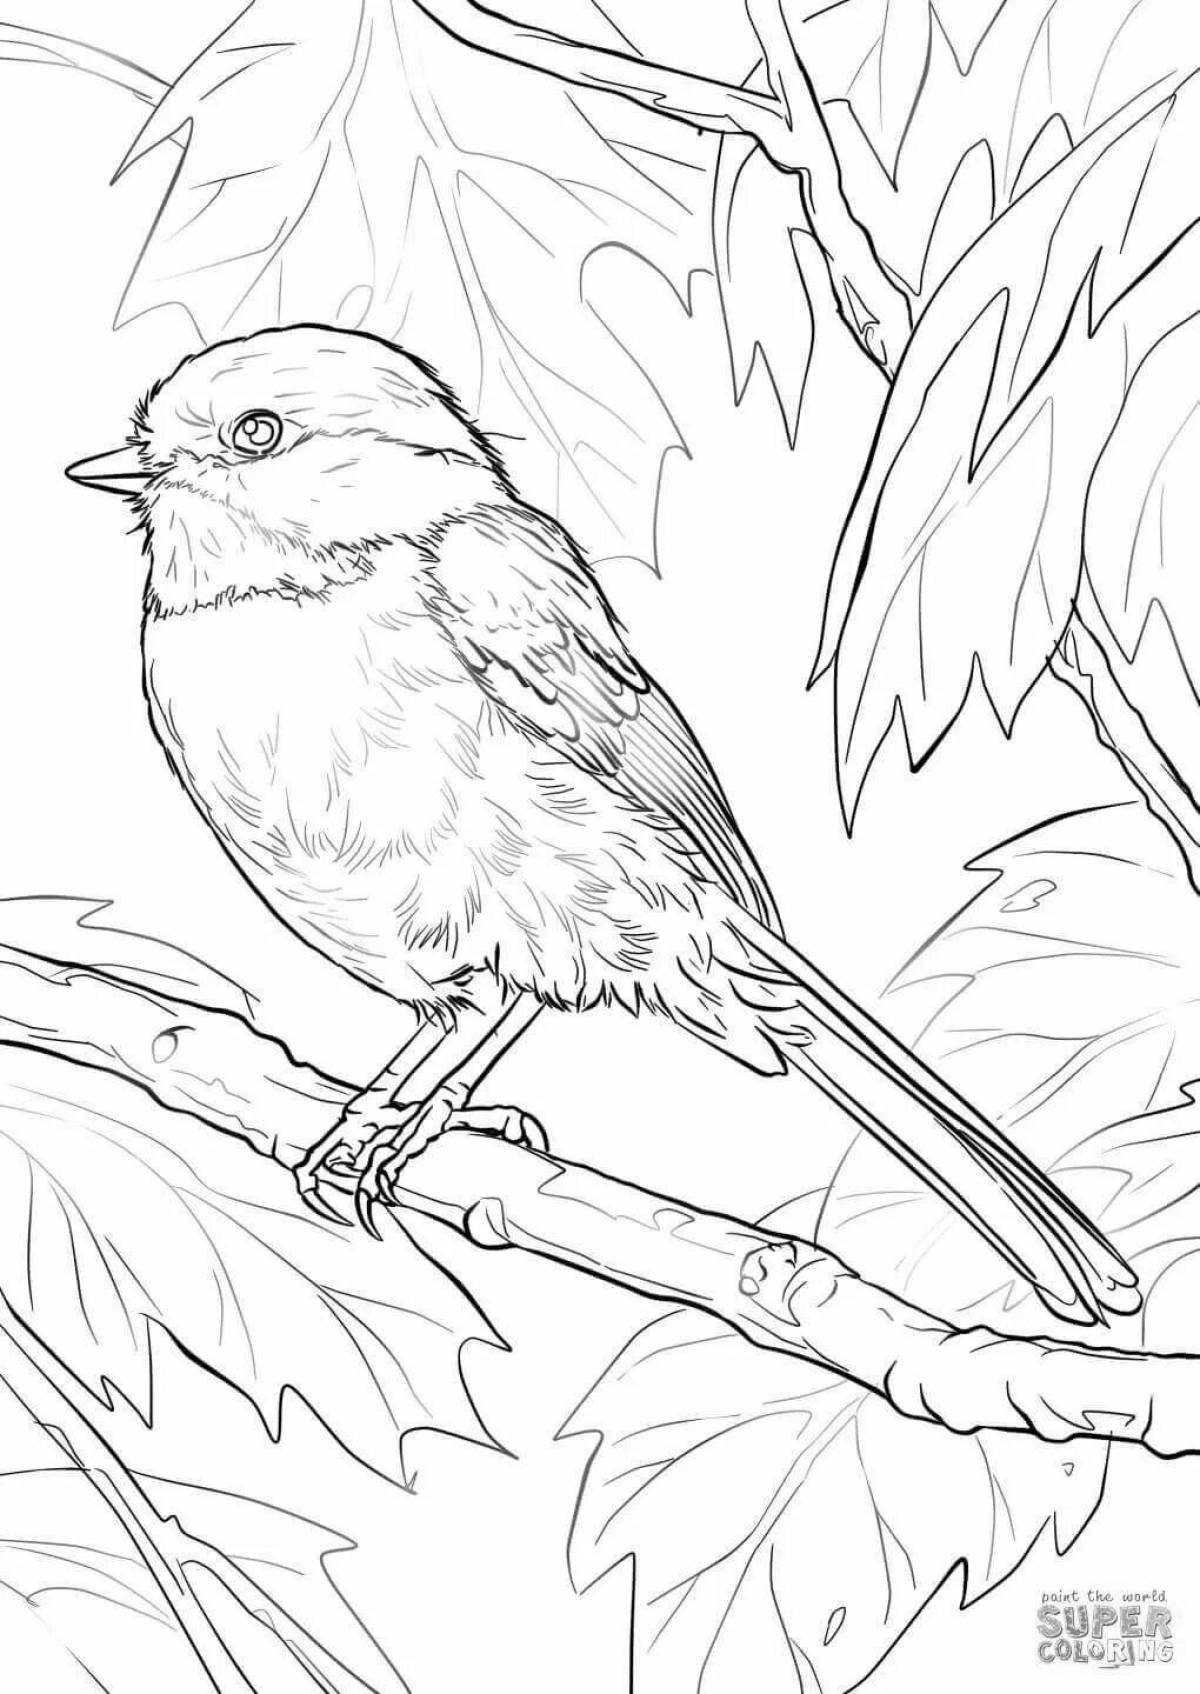 Titmouse on a branch #1